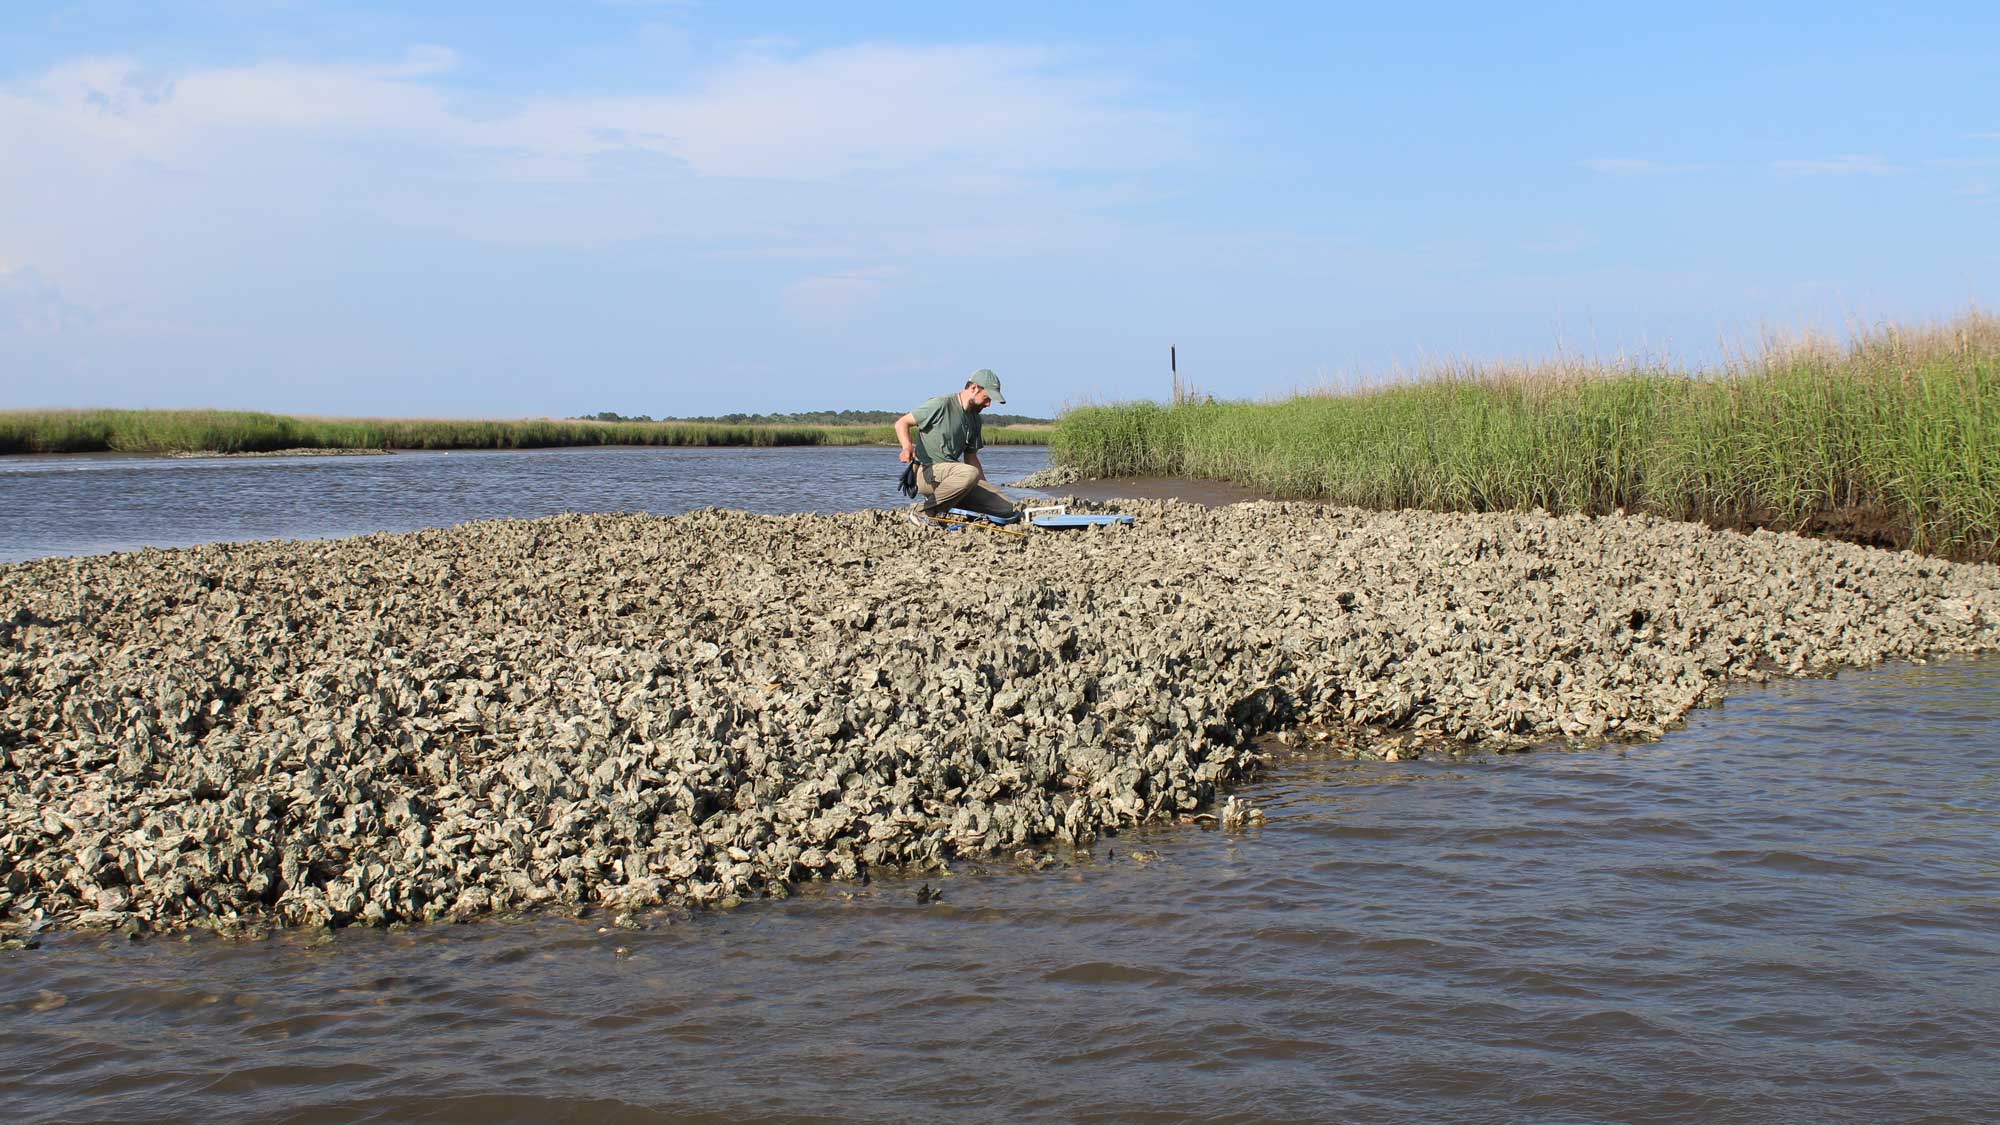 Photograph of a man collecting oyster samples.